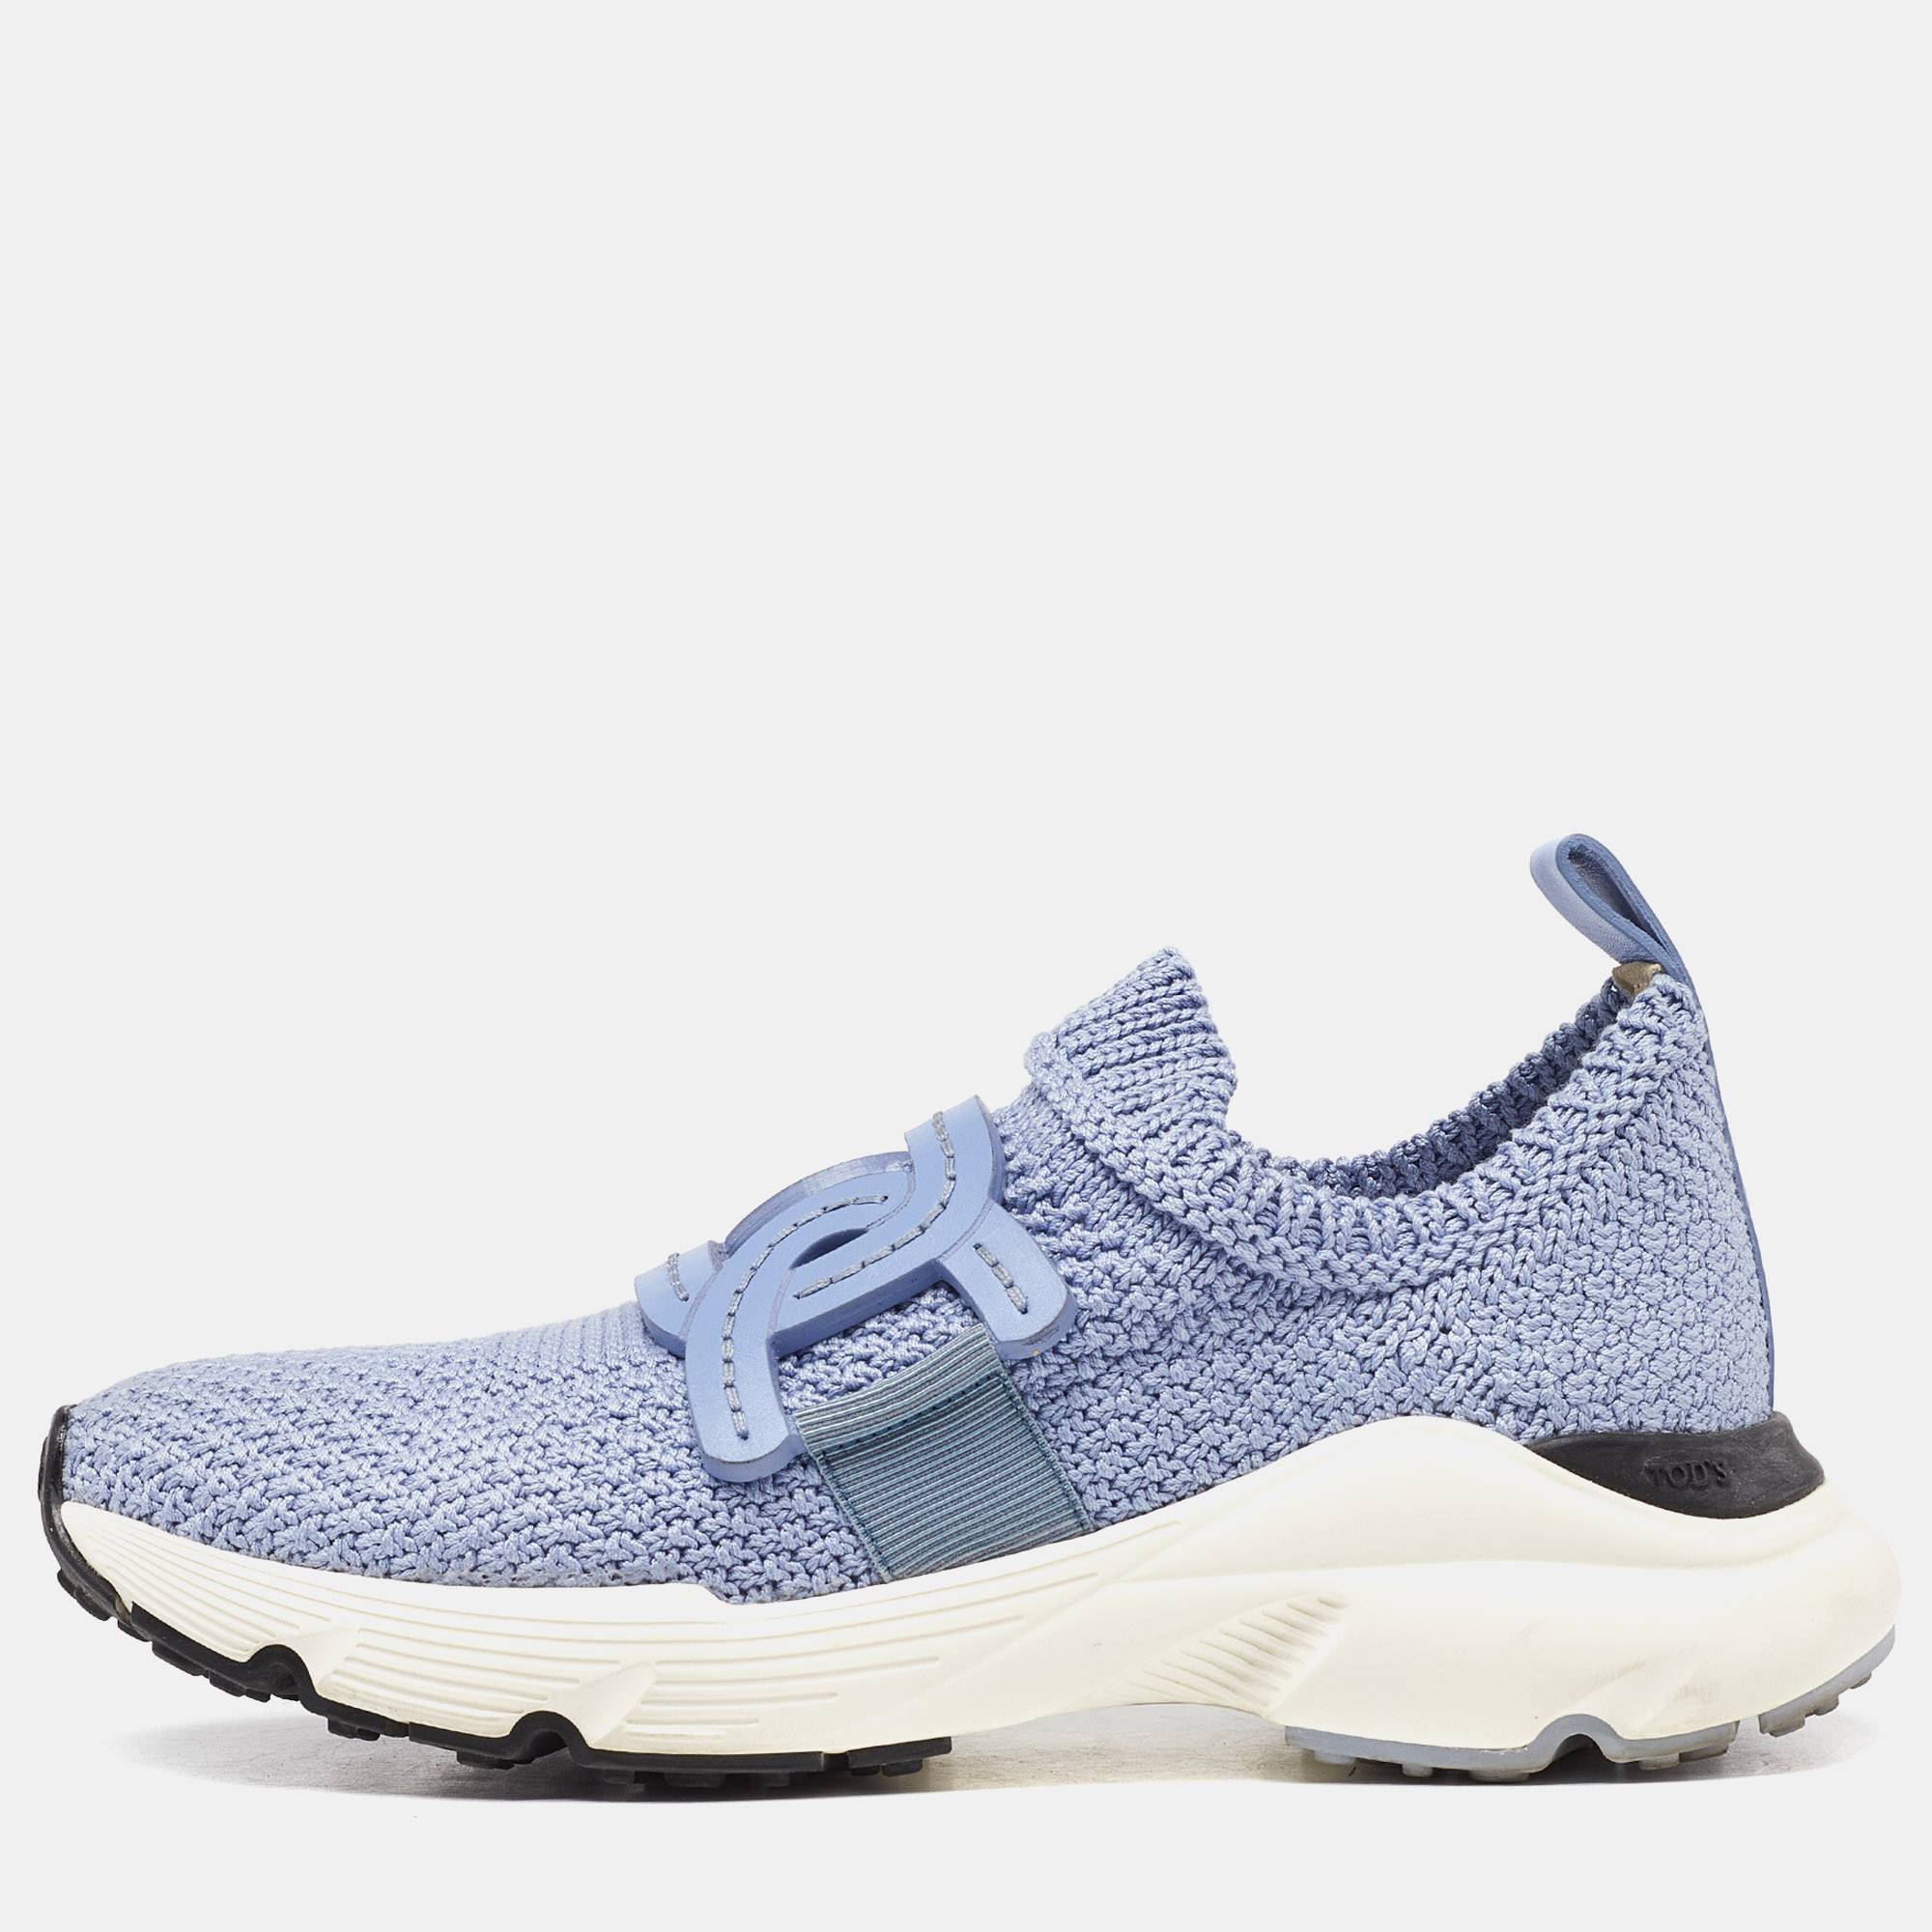 These Tods sneakers for women are perfect for days when you wish for comfort and style The shoes are crafted from knit fabric and feature rounded toes a low top profile and durable rubber soles.